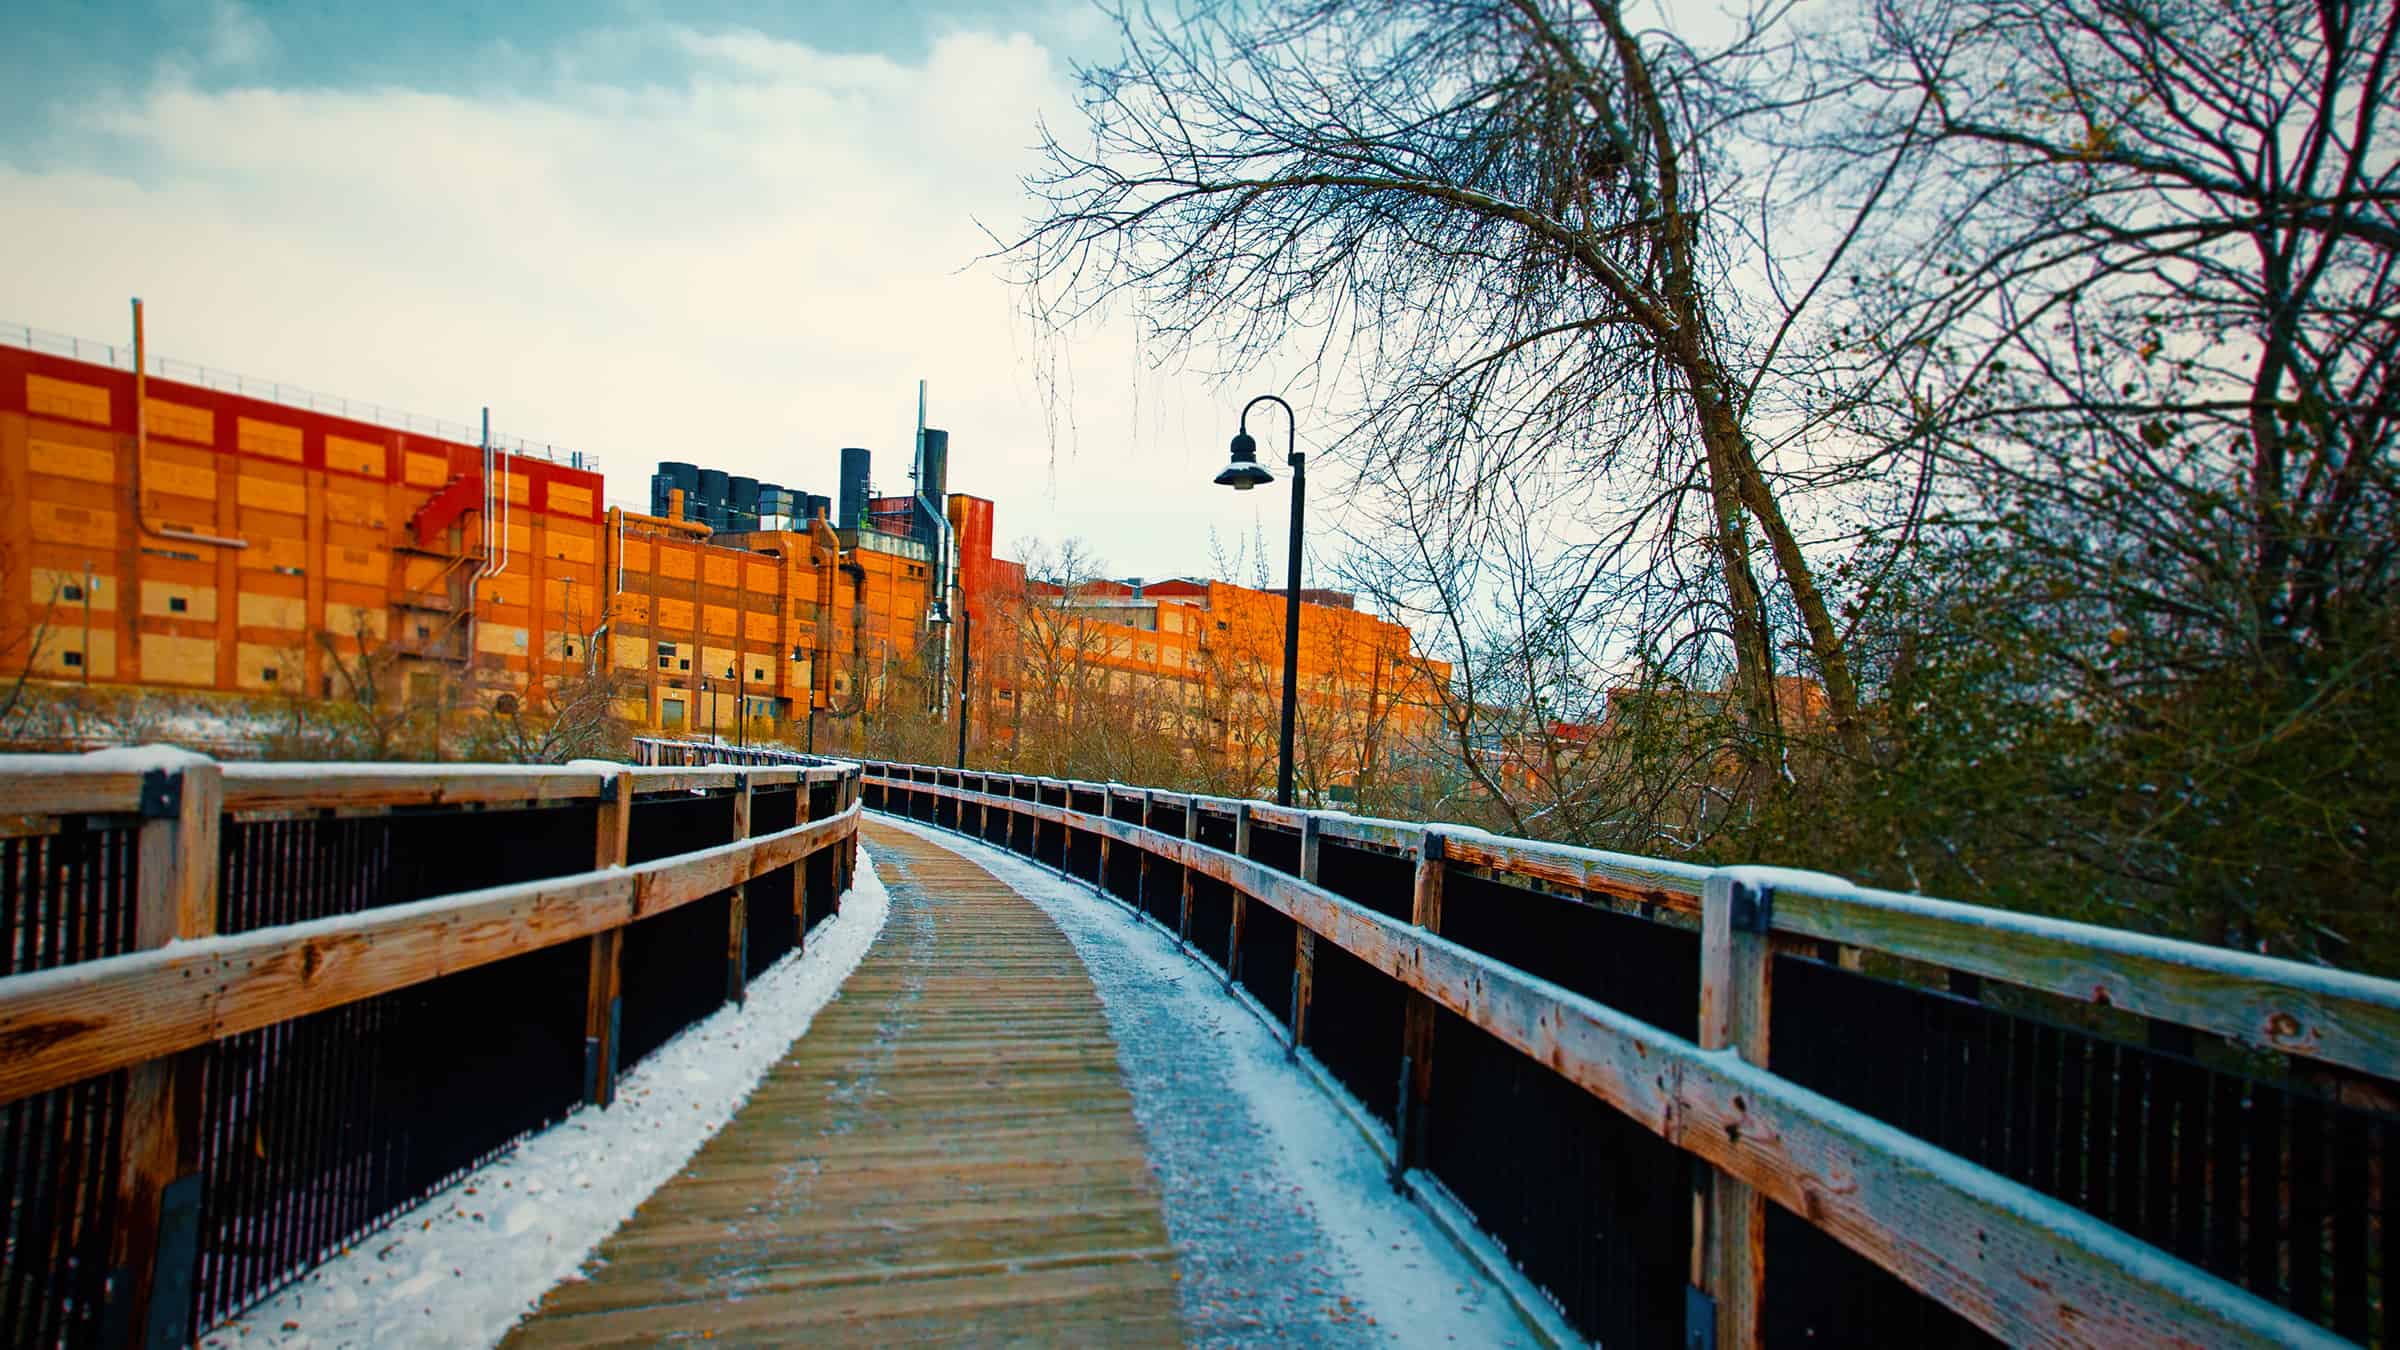 Pedestrian Walkway over the Chippewa River in Eau Claire, Wisconsin, with Banbury Place in the Background